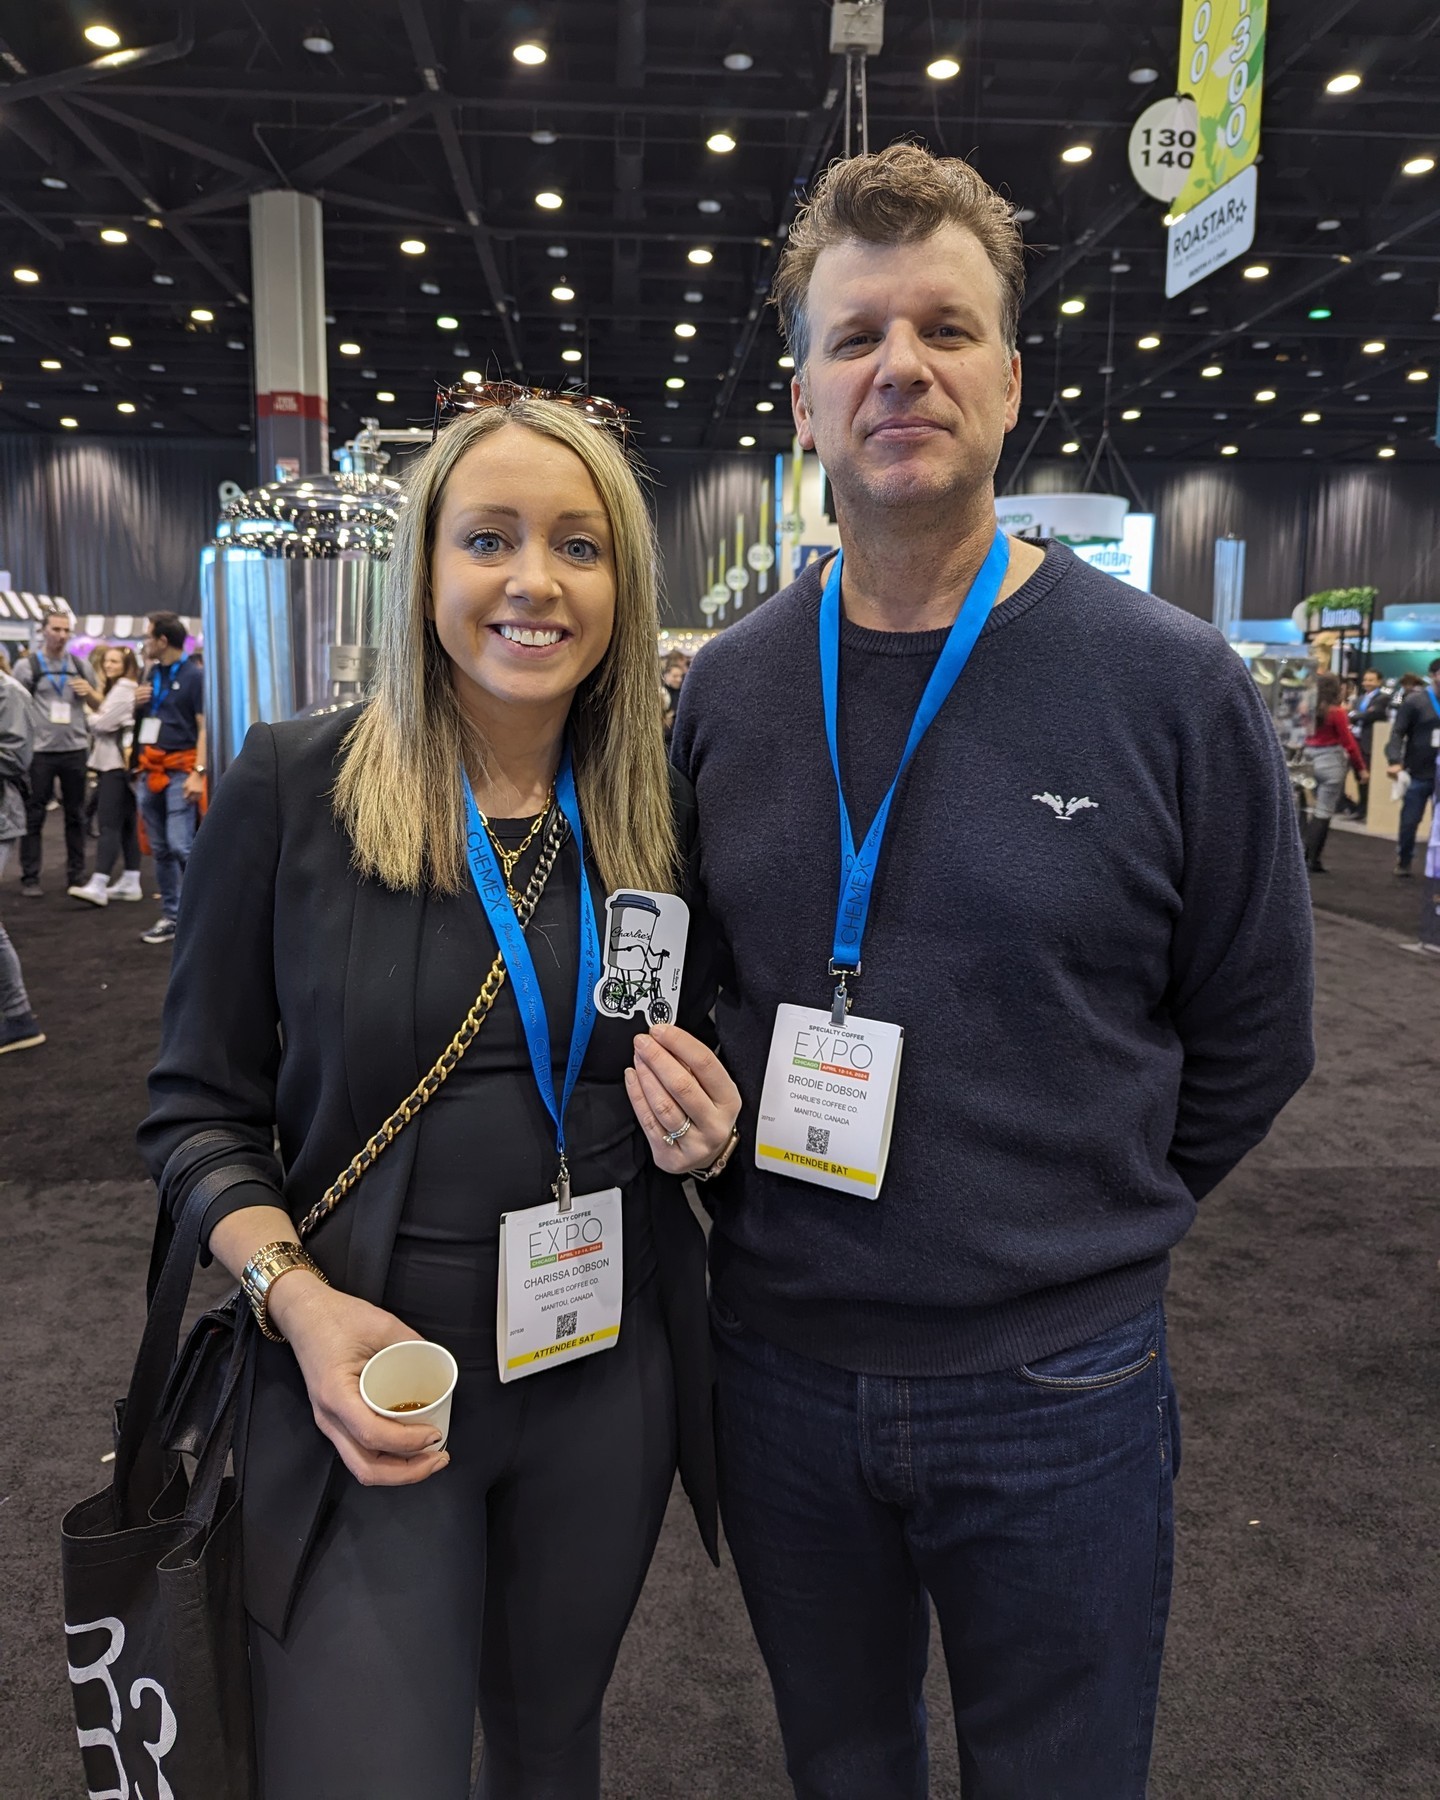 Meeting new faces and spreading our brand at the conference was a highlight! 🤝 Seeing attendees proudly holding our stickers was a fantastic moment. 

Thanks to everyone who stopped by! 
📸 : Charissa and Brodie from Charlie's Coffee Company 
#StickersAndMore
#ElevateYourBrand